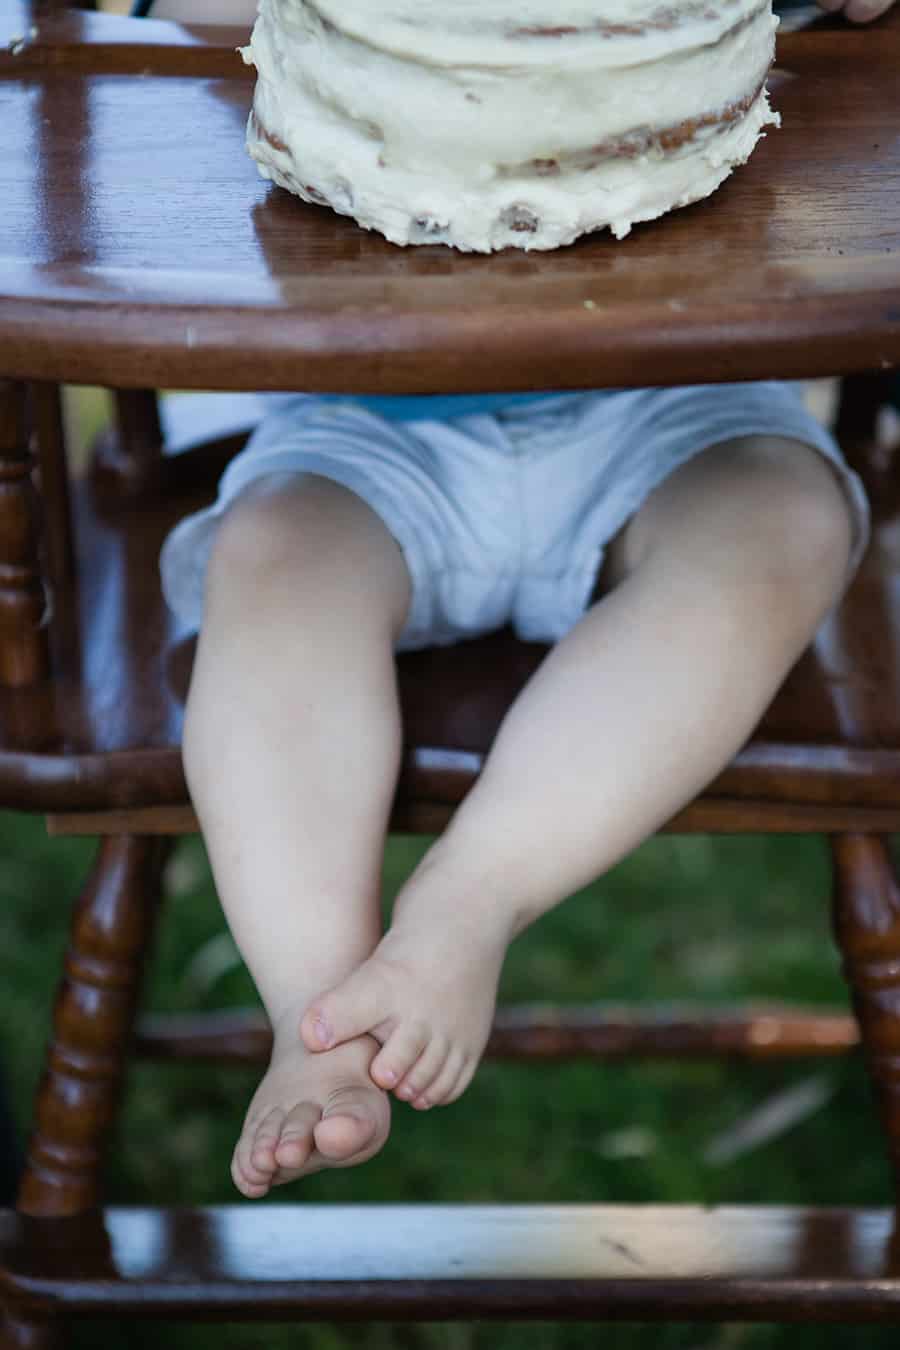 A baby sitting in a wooden high chair with a cake.